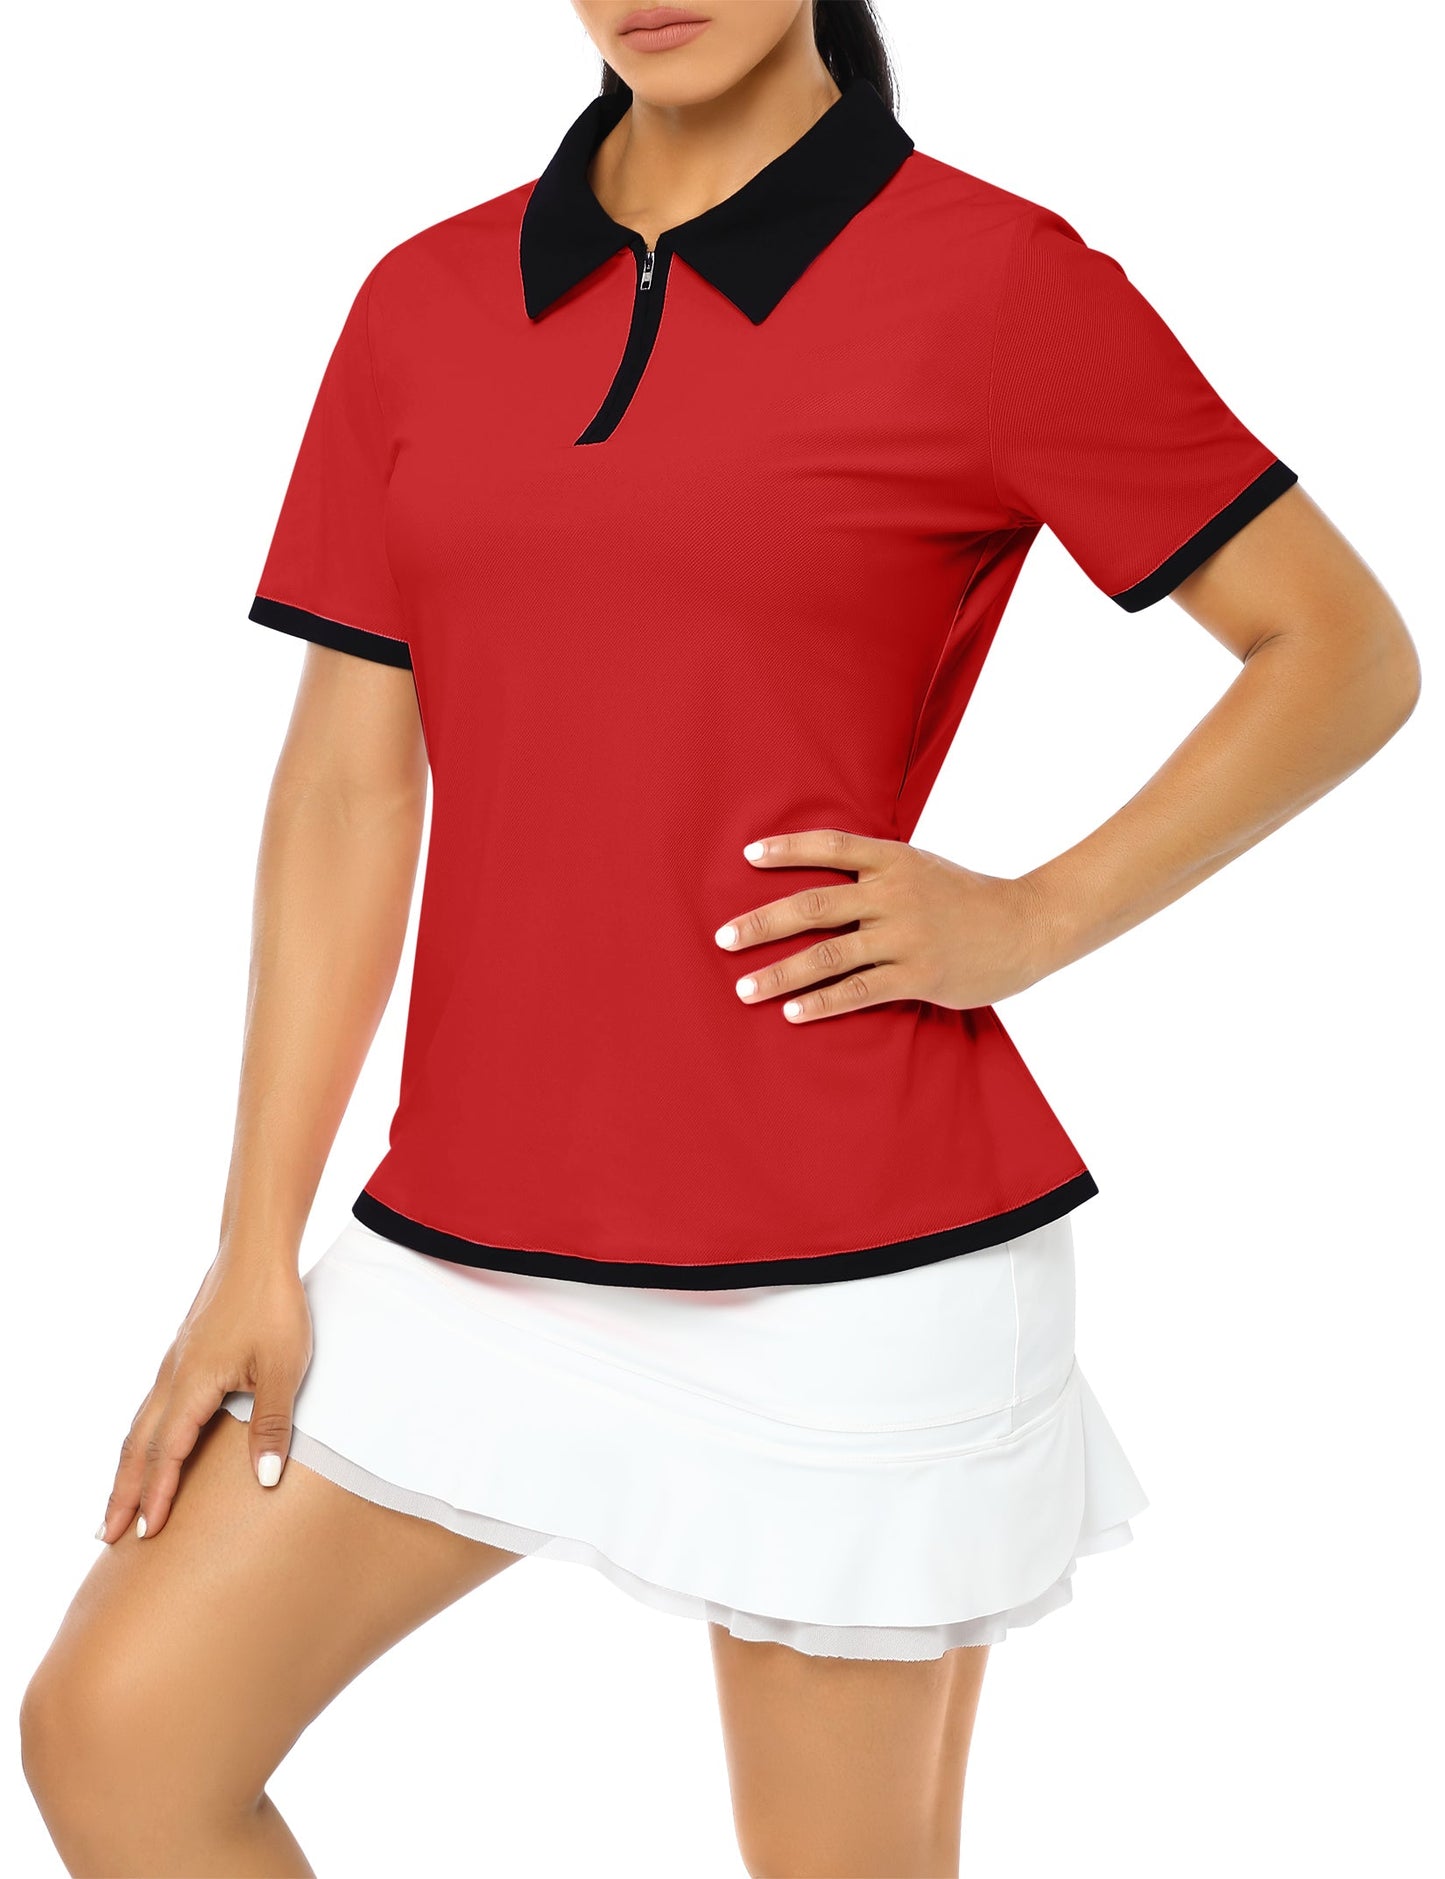 YESFASHION Polo Shirts for Women Golf Tops Red